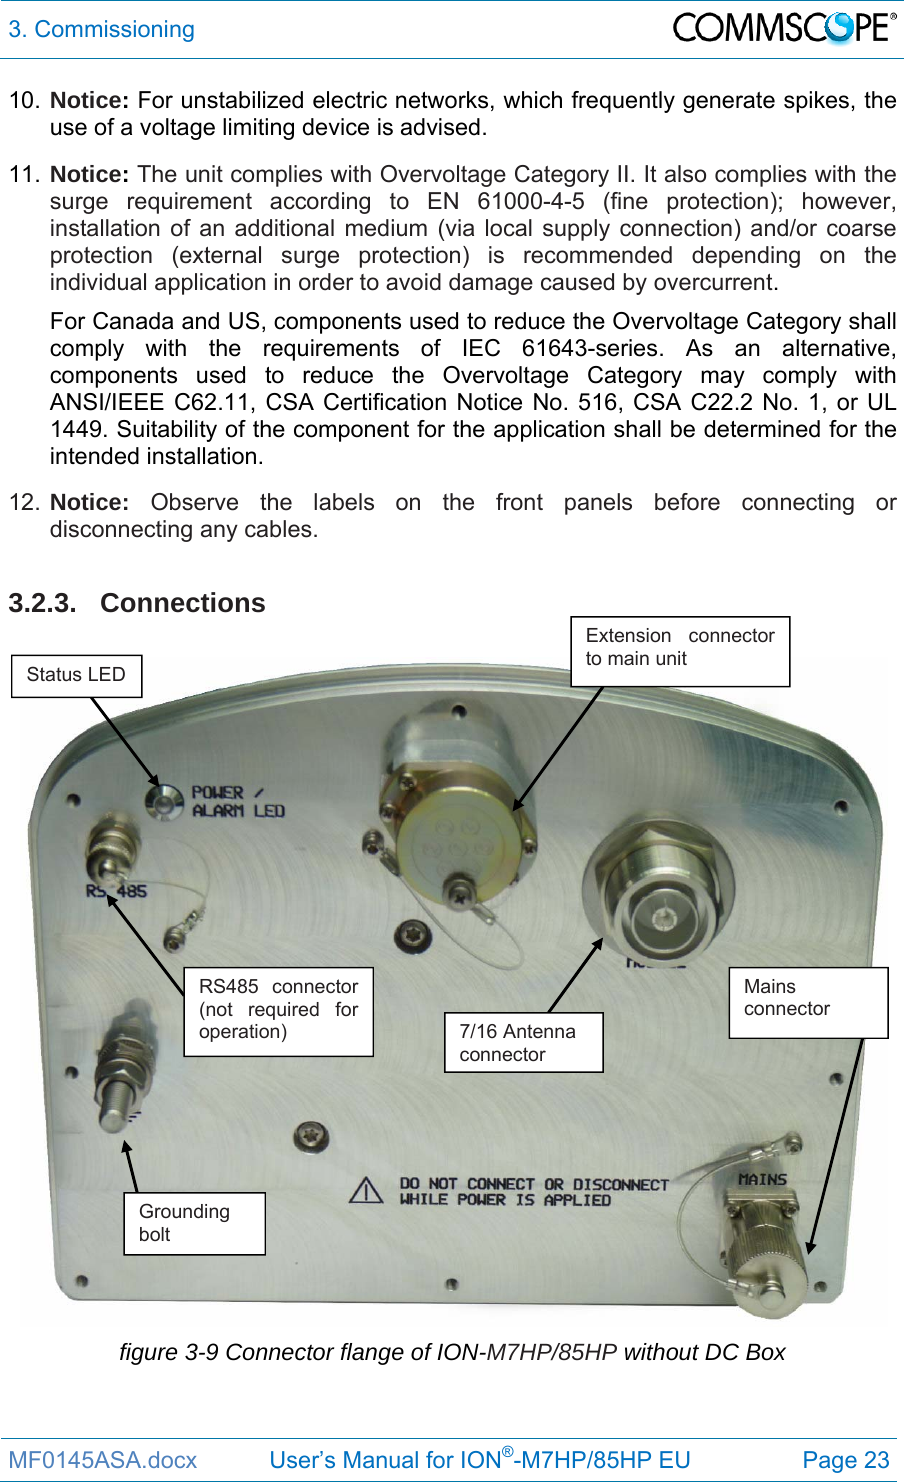 3. Commissioning  MF0145ASA.docx           User’s Manual for ION®-M7HP/85HP EU  Page 23 10. Notice: For unstabilized electric networks, which frequently generate spikes, the use of a voltage limiting device is advised. 11. Notice: The unit complies with Overvoltage Category II. It also complies with the surge requirement according to EN 61000-4-5 (fine protection); however, installation of an additional medium (via local supply connection) and/or coarse protection (external surge protection) is recommended depending on the individual application in order to avoid damage caused by overcurrent. For Canada and US, components used to reduce the Overvoltage Category shall comply with the requirements of IEC 61643-series. As an alternative, components used to reduce the Overvoltage Category may comply with ANSI/IEEE C62.11, CSA Certification Notice No. 516, CSA C22.2 No. 1, or UL 1449. Suitability of the component for the application shall be determined for the intended installation. 12. Notice: Observe the labels on the front panels before connecting or disconnecting any cables.   3.2.3. Connections   figure 3-9 Connector flange of ION-M7HP/85HP without DC Box Mains connector Grounding bolt Extension connector to main unit Status LED 7/16 Antenna connector RS485 connector (not required for operation) 